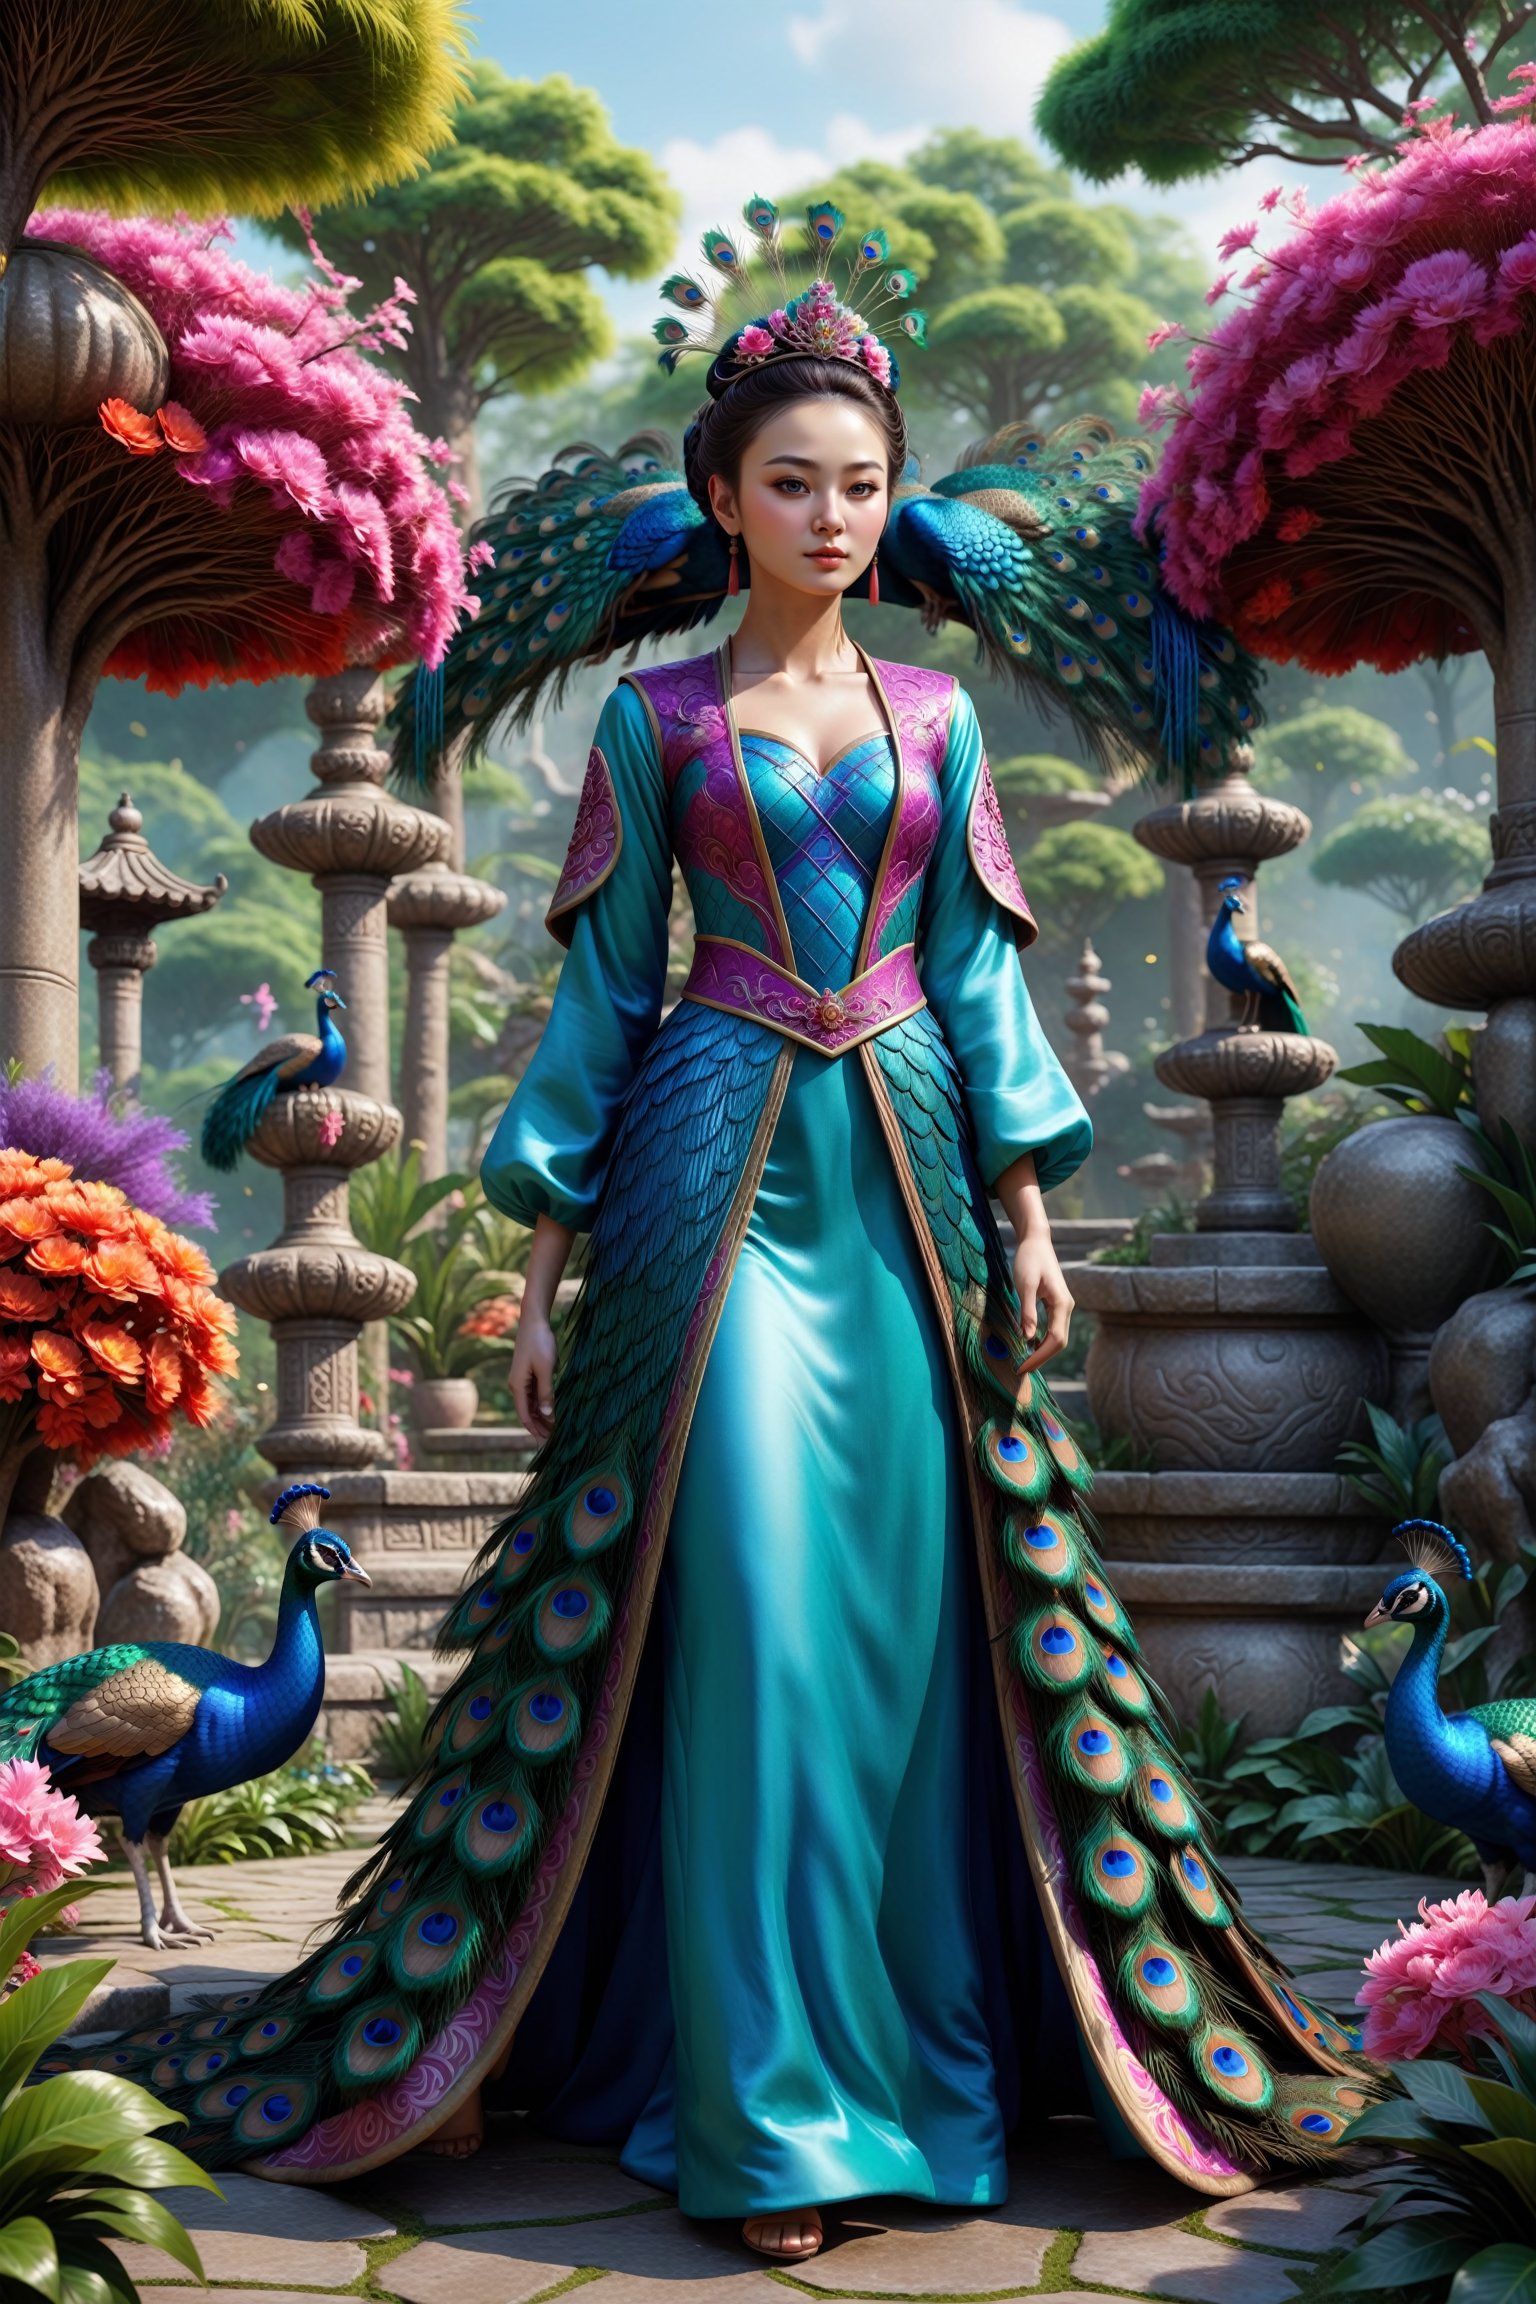 A peacock princess in the center of a mysterious garden, inspired by Chinese mythology, with vivid and vibrant colors, combining traditional elements with modern aesthetics. A realistic human character in 3D style, 8K high resolution, with vivid and iridescent colors.